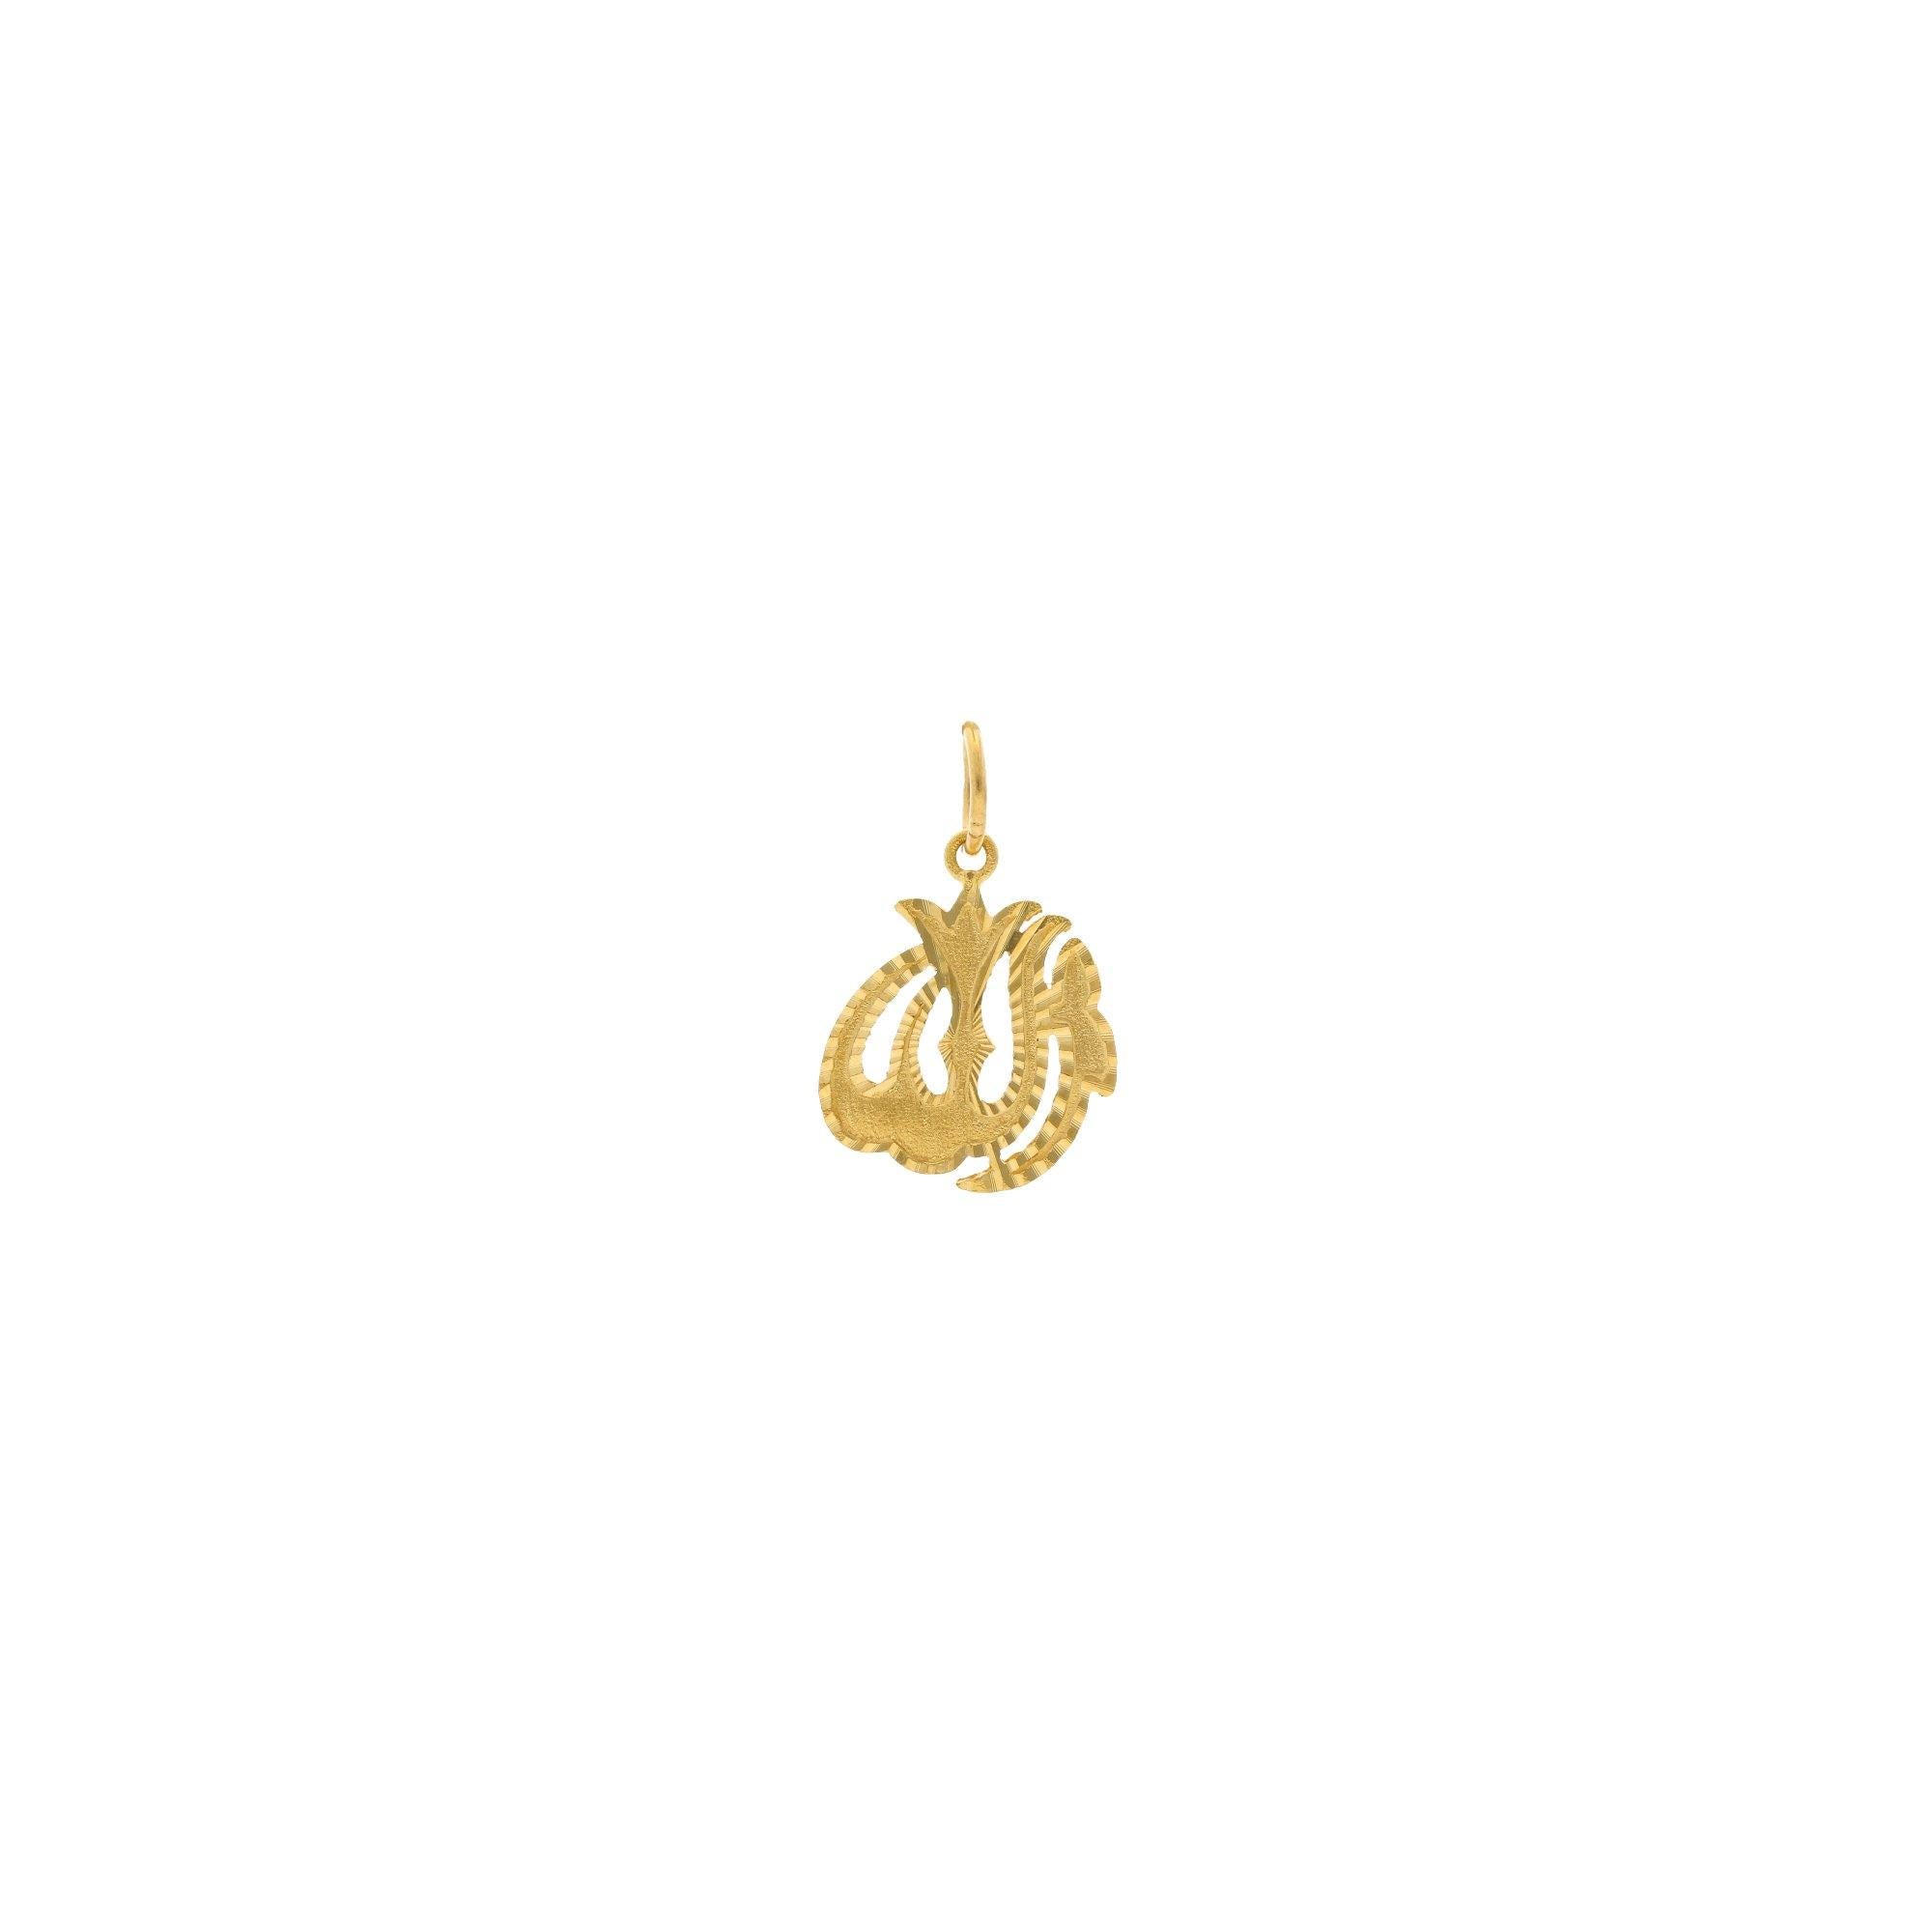 Buy 14K Gold Plated Allah Necklace, Islamic Arabic Calligraphy Gift,  Religious Allah Necklace, Gift for Eid Mubarak, Islamic Necklace Online in  India - Etsy